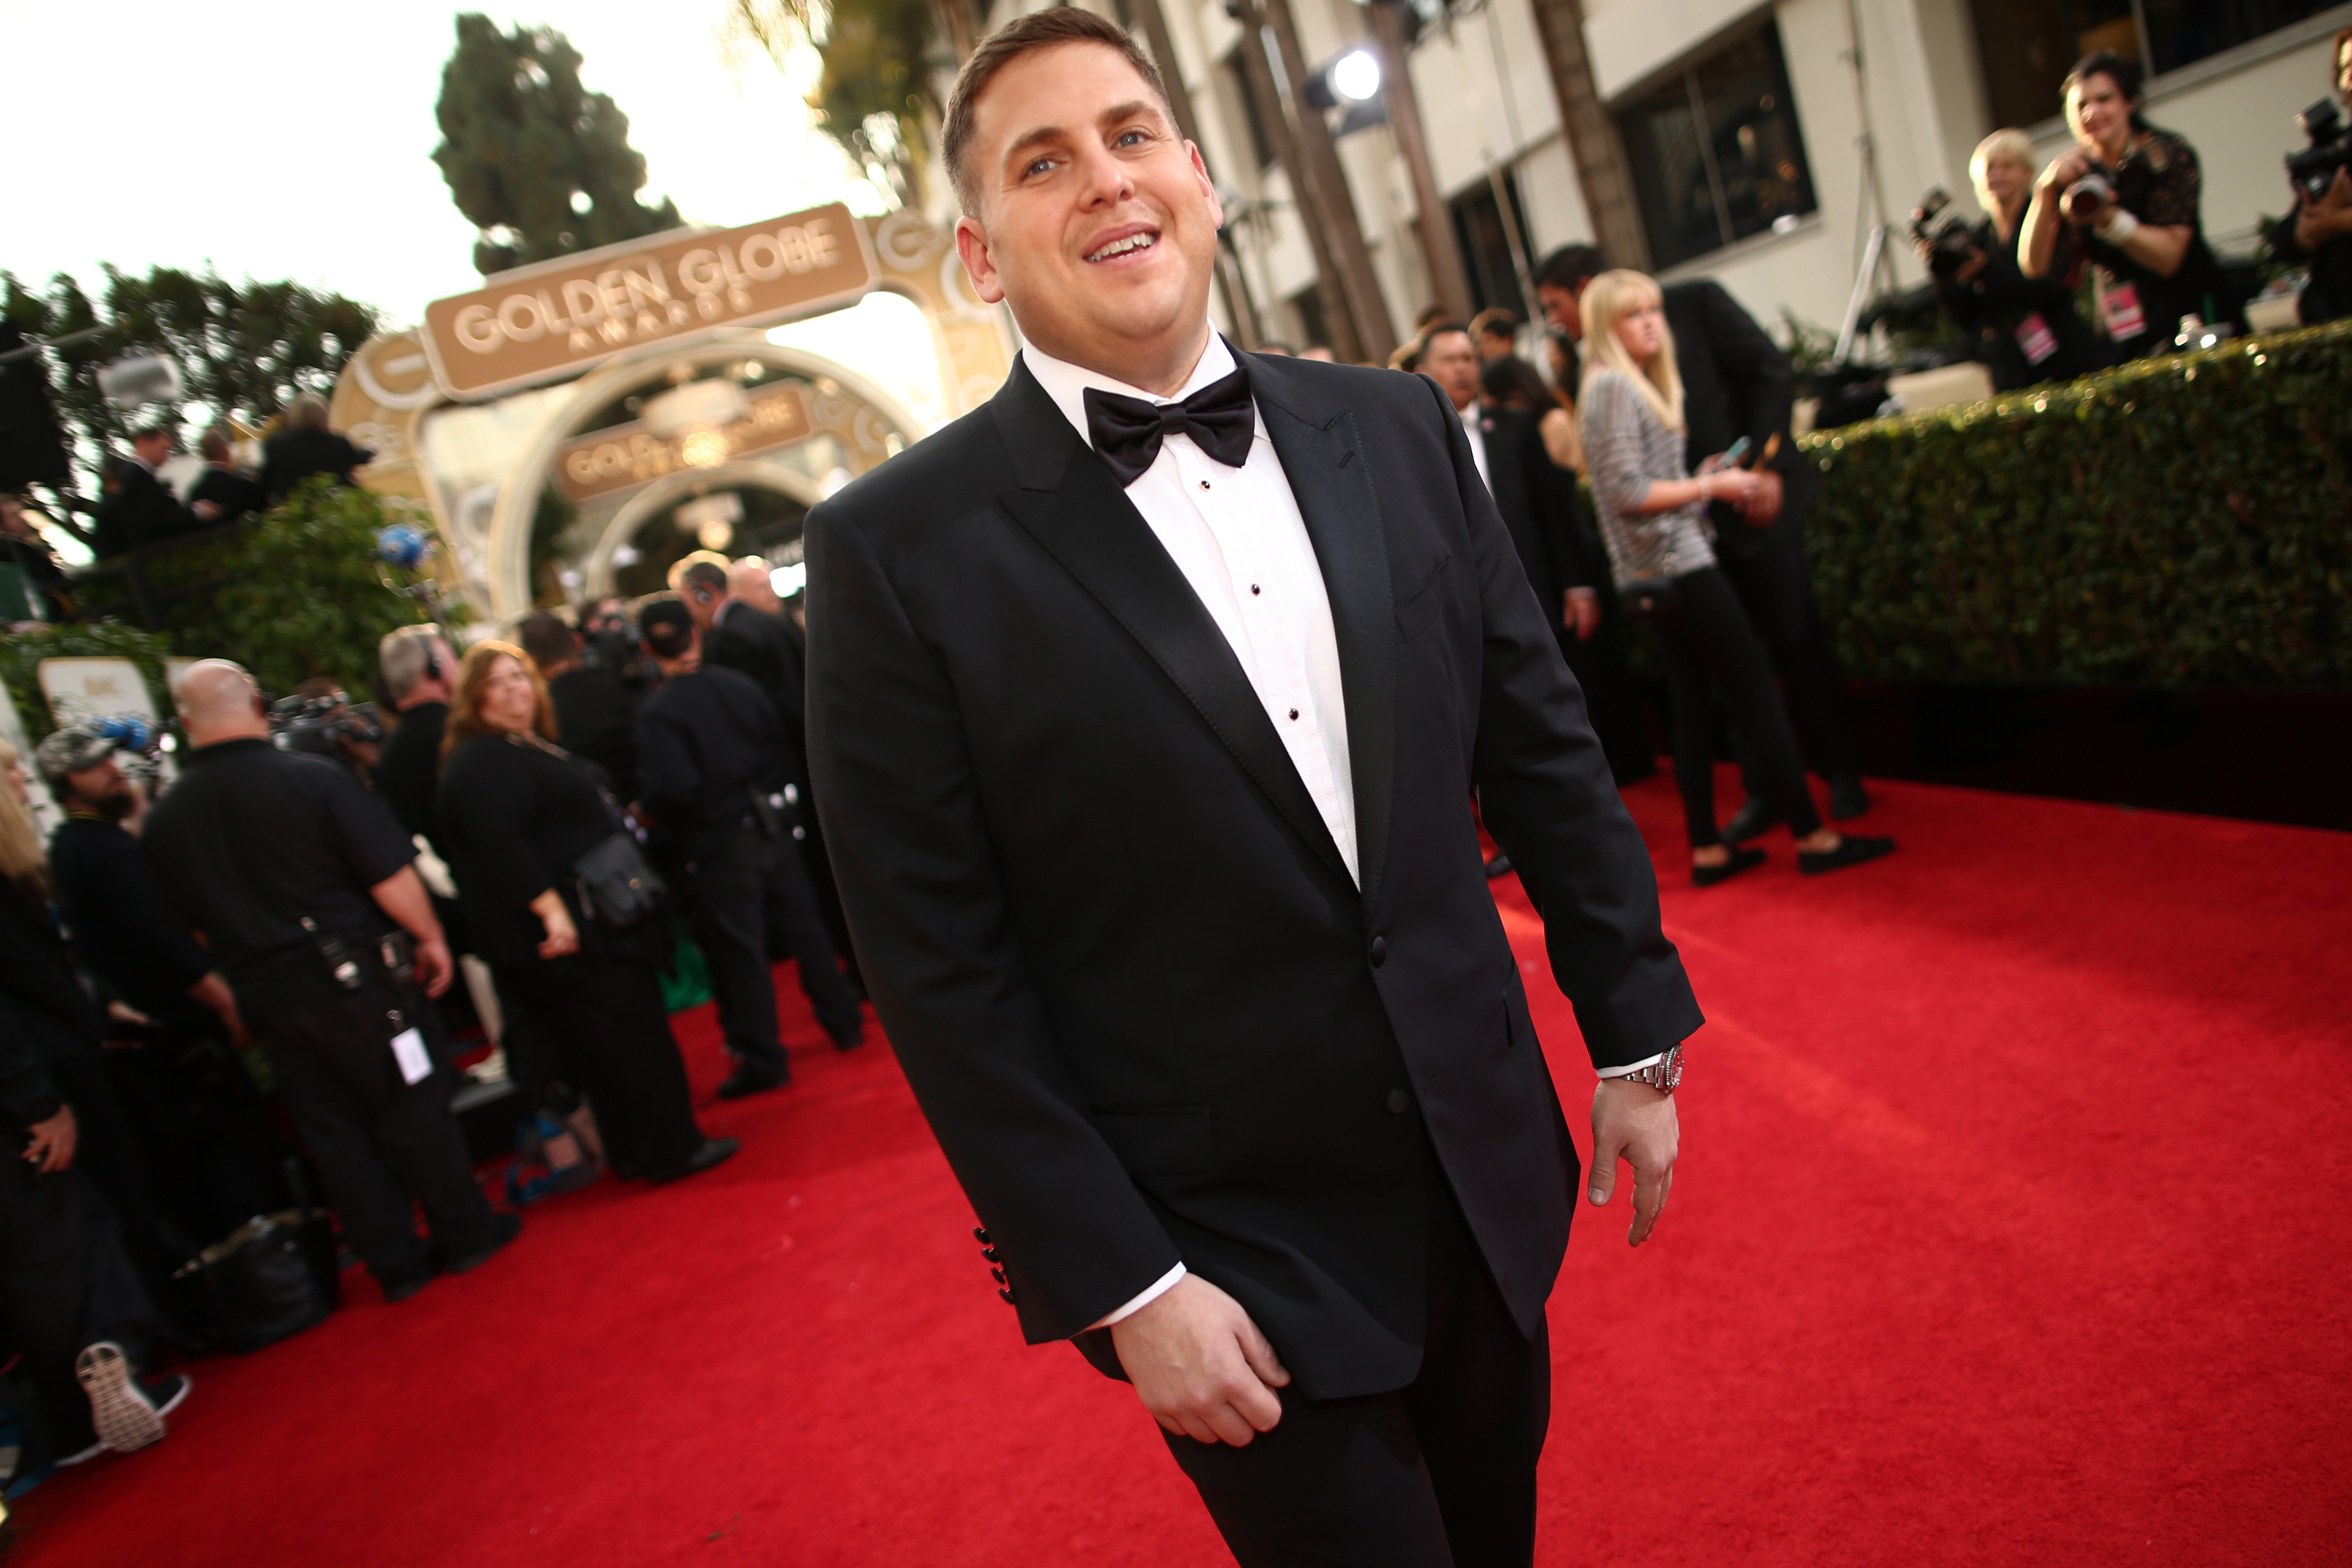 Jonah Hill at the 71st Annual Golden Globe Awards hosted at the Beverly Hilton Hotel in Beverly Hills, California, on January 12, 2014. | Source: Getty Images